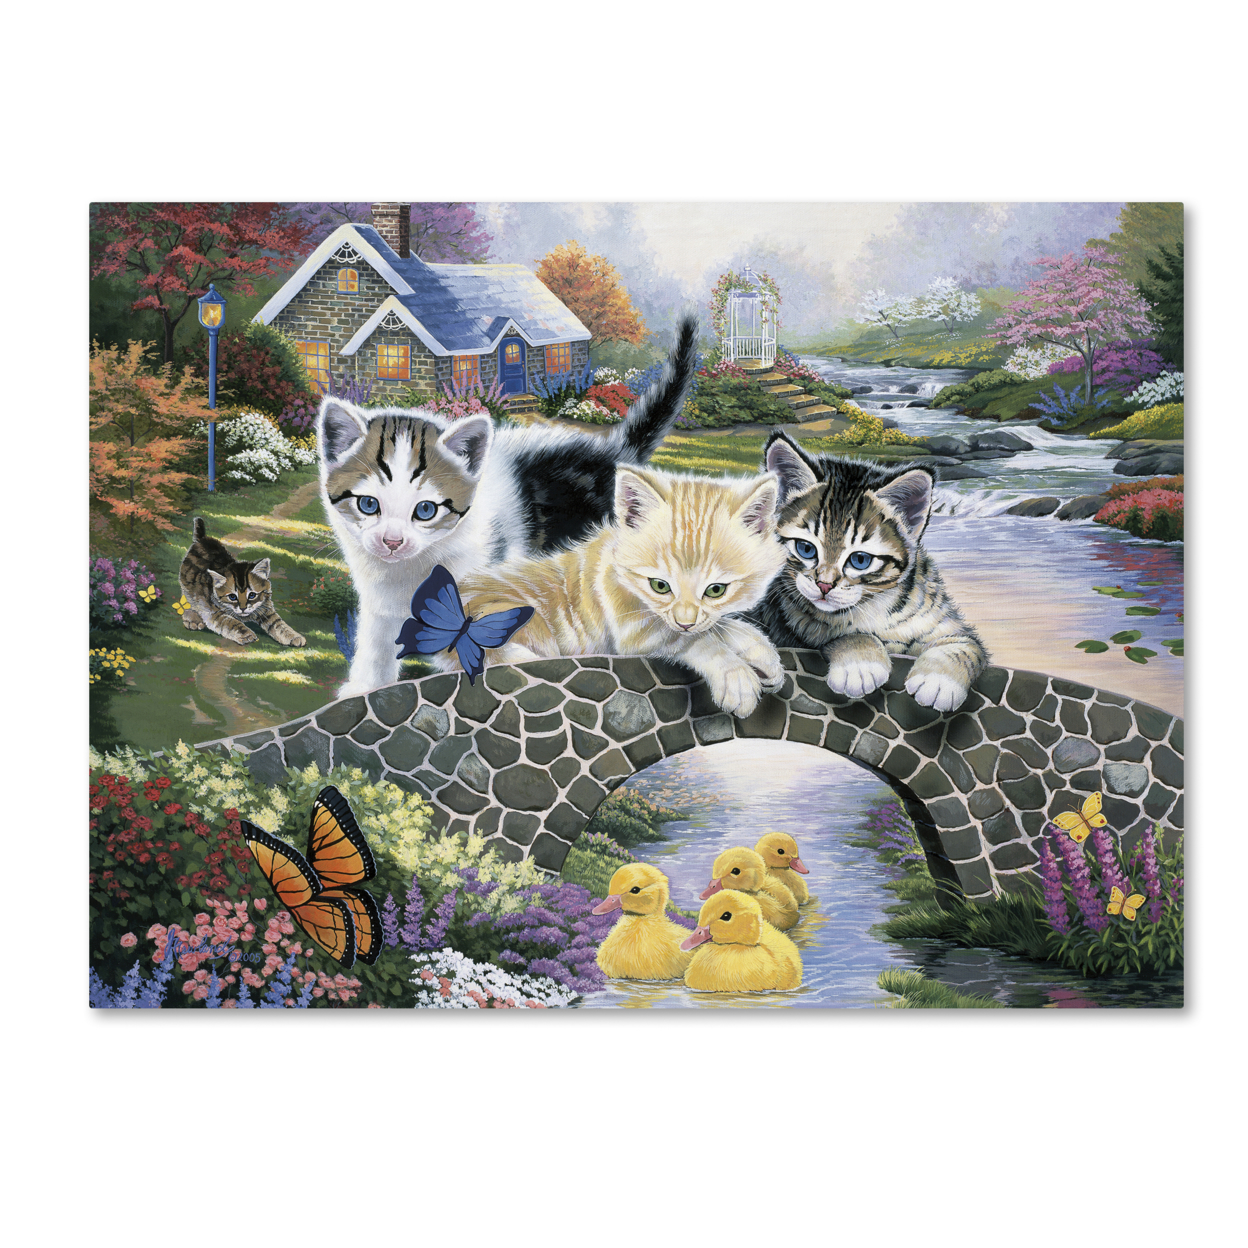 Jenny Newland 'A Purrfect Day' Canvas Wall Art 35 X 47 Inches